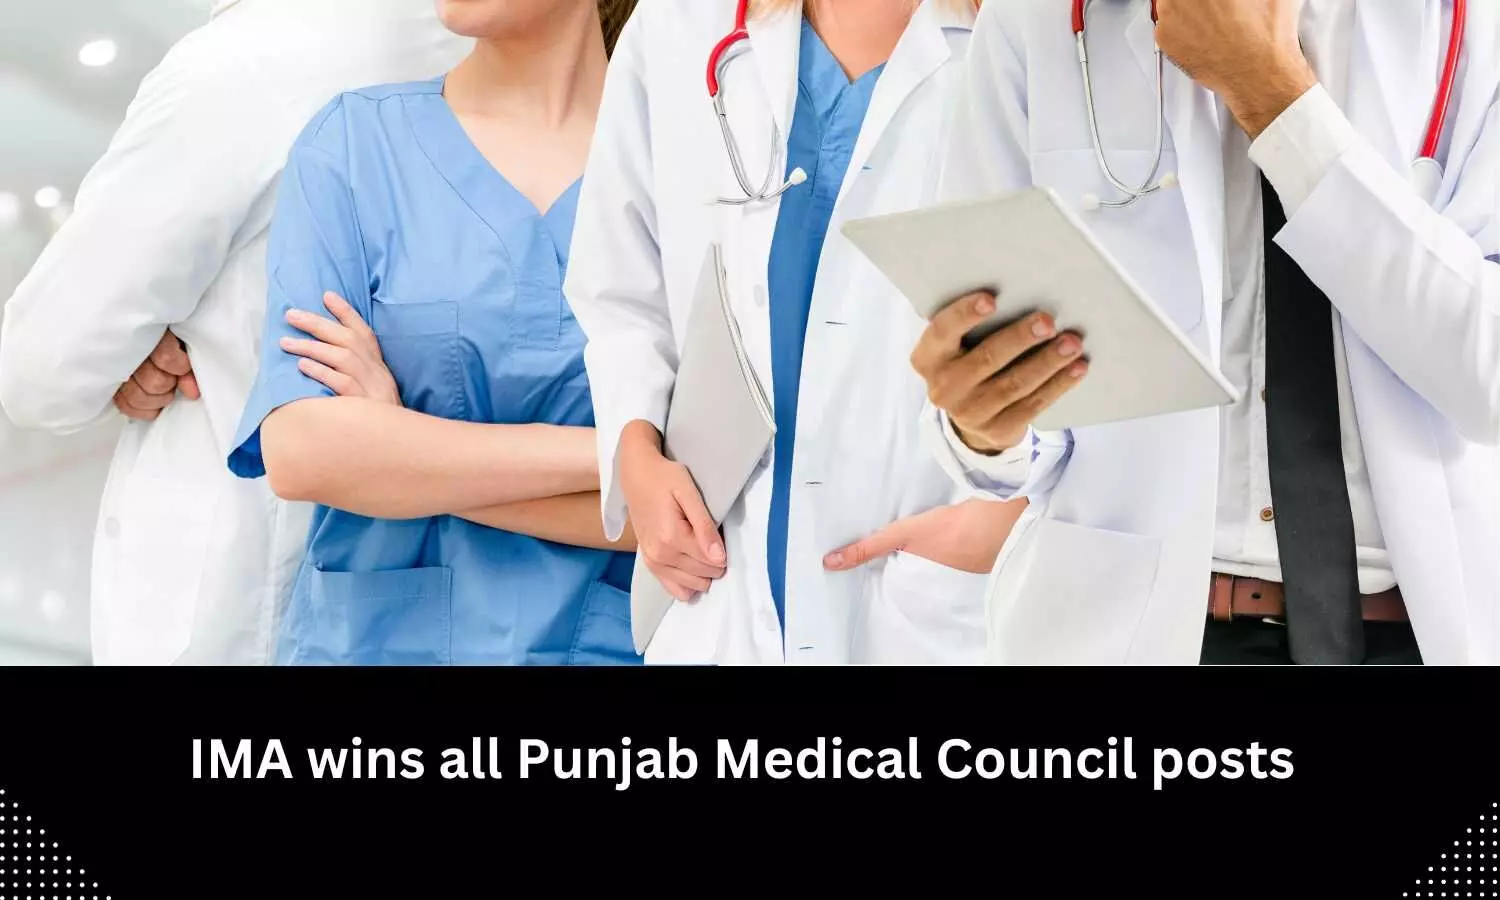 IMA secures all 10 posts in Punjab Medical Council elections